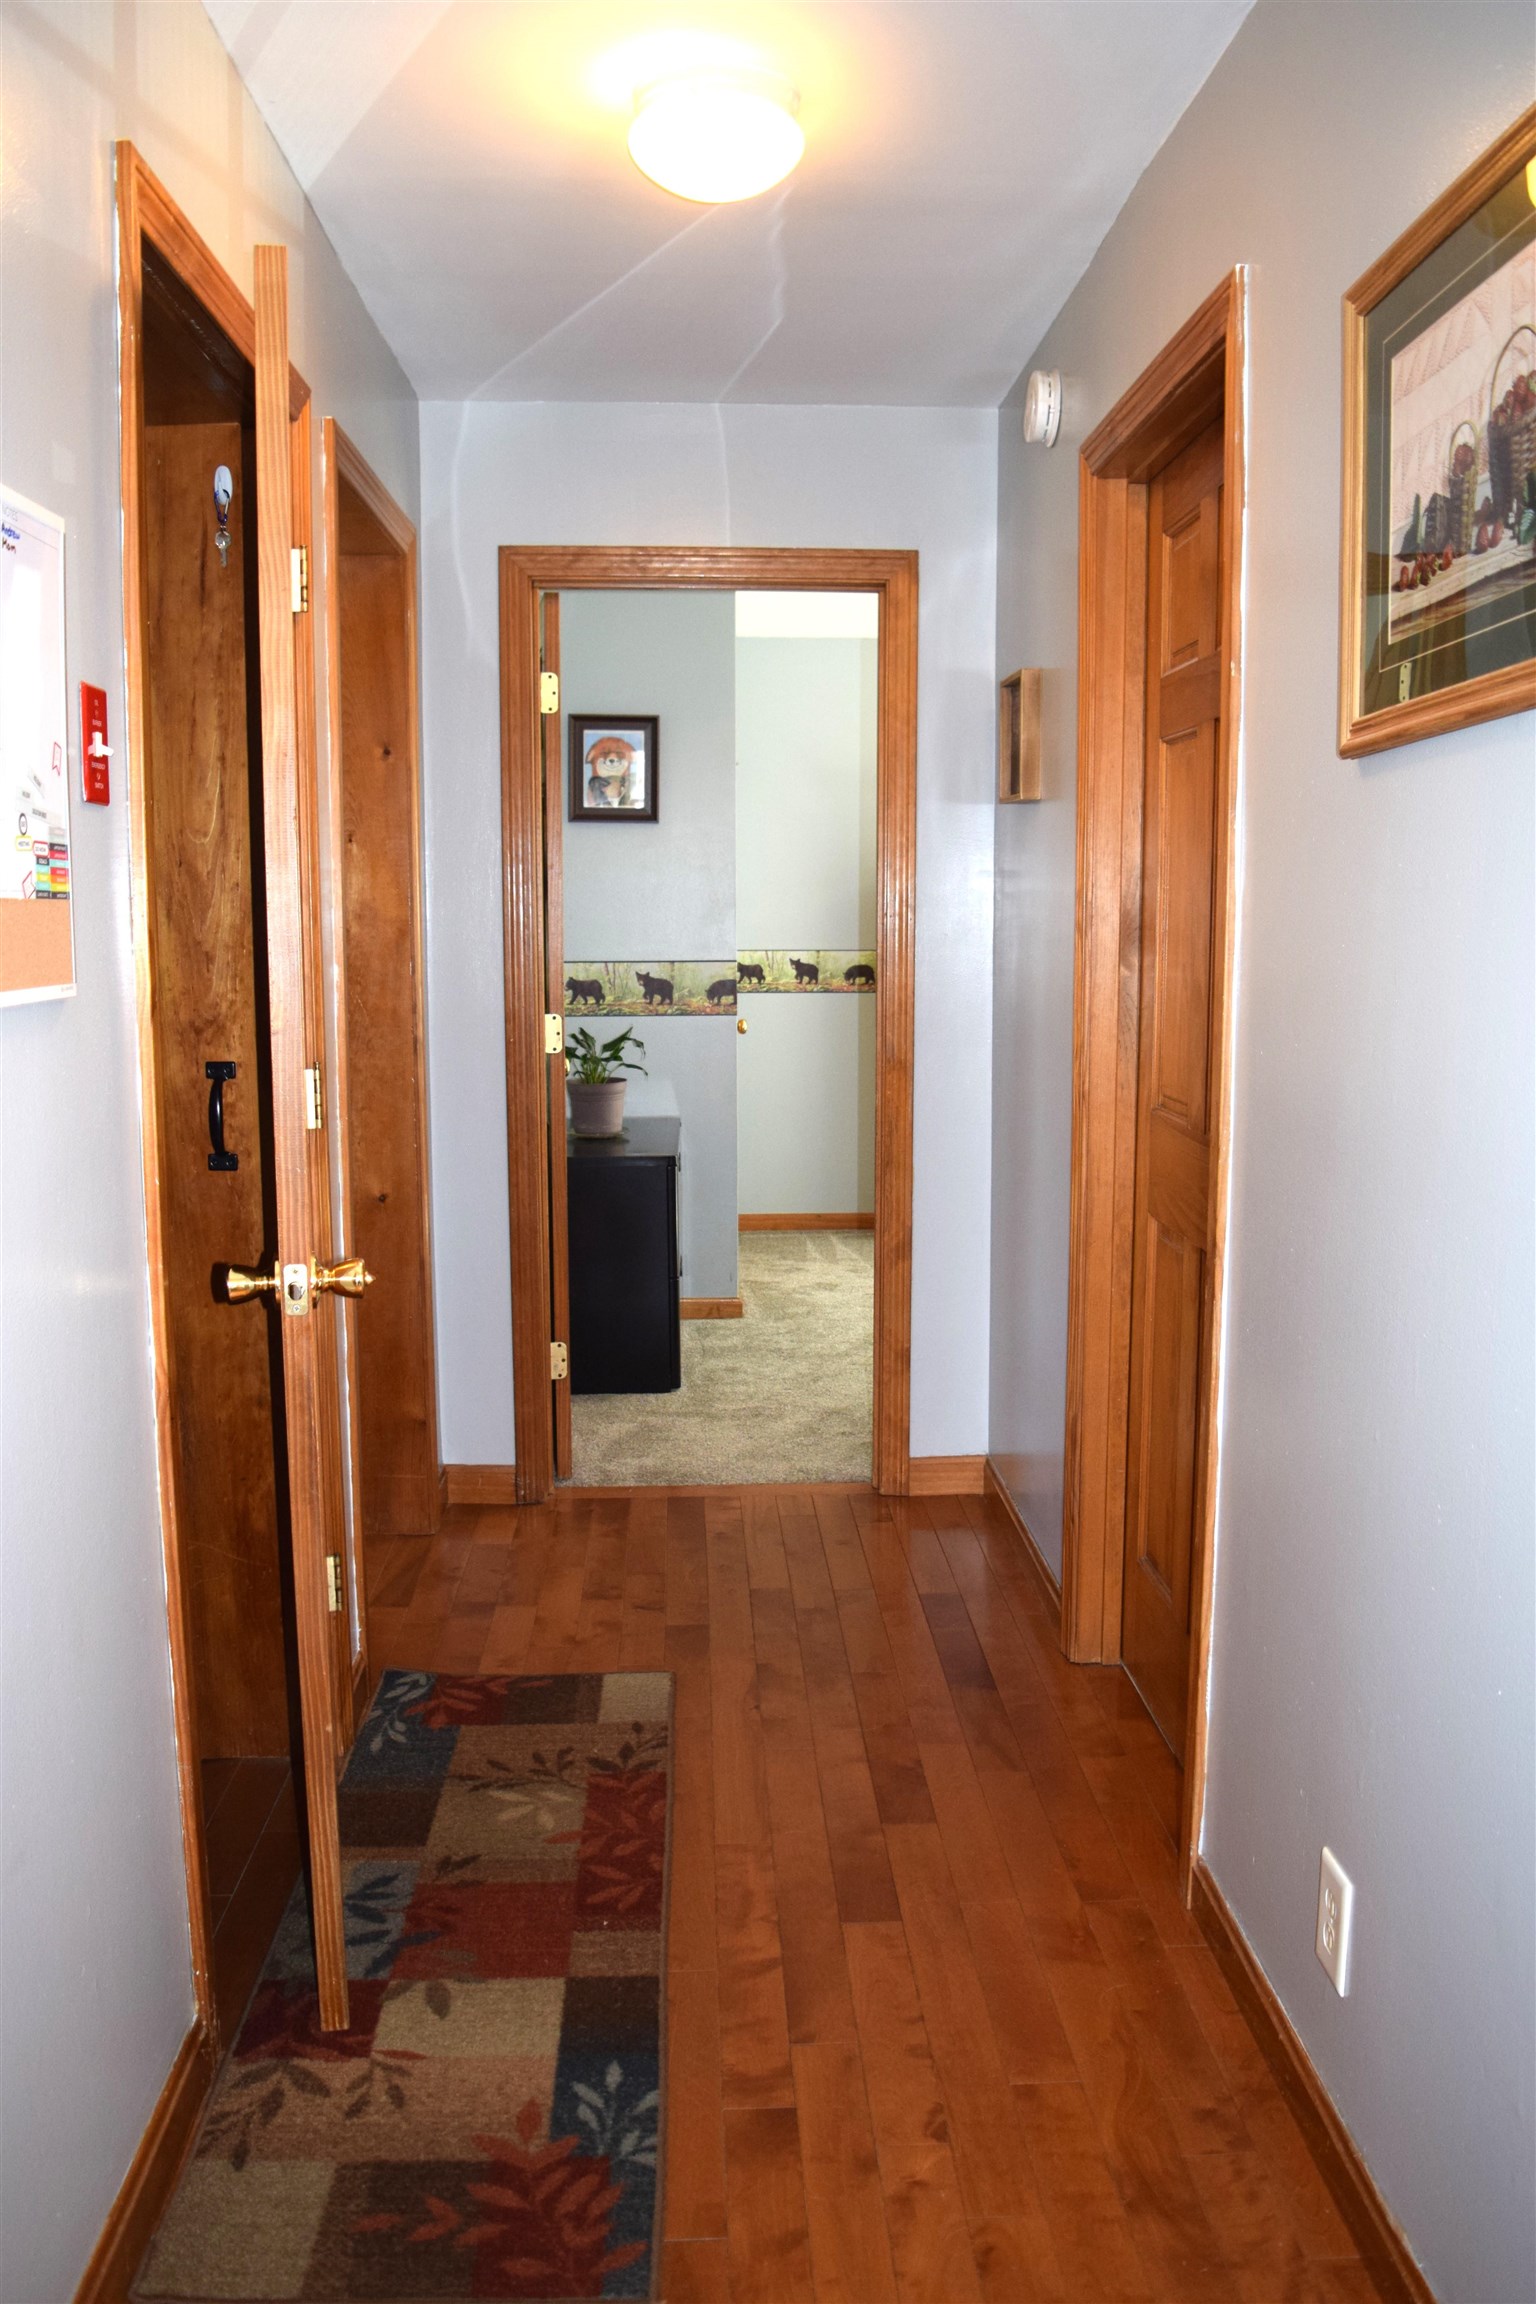 Center hallway on main level with solid wood doors